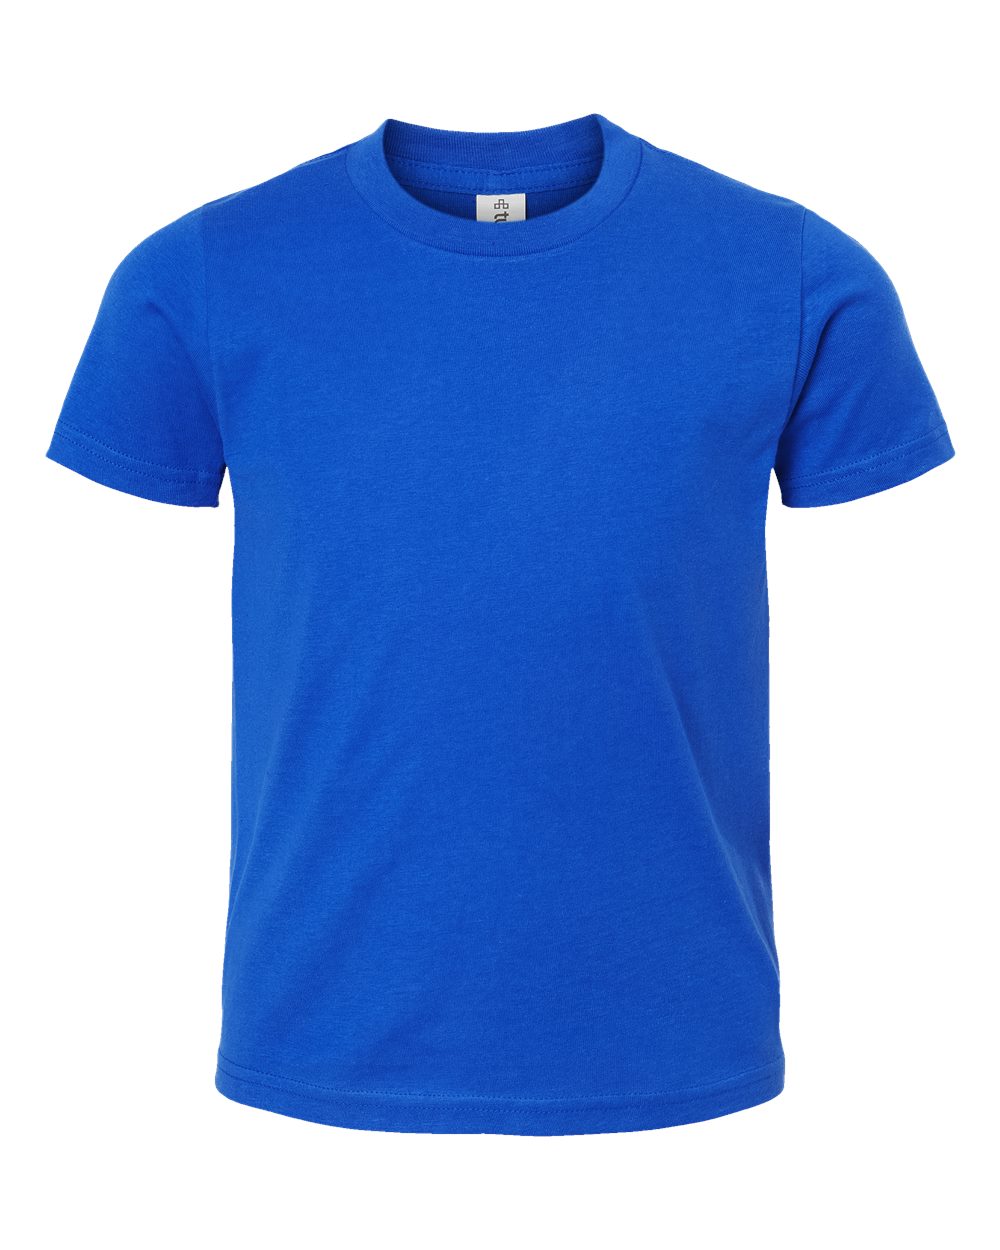 Tultex Youth Tee (235) in Royal